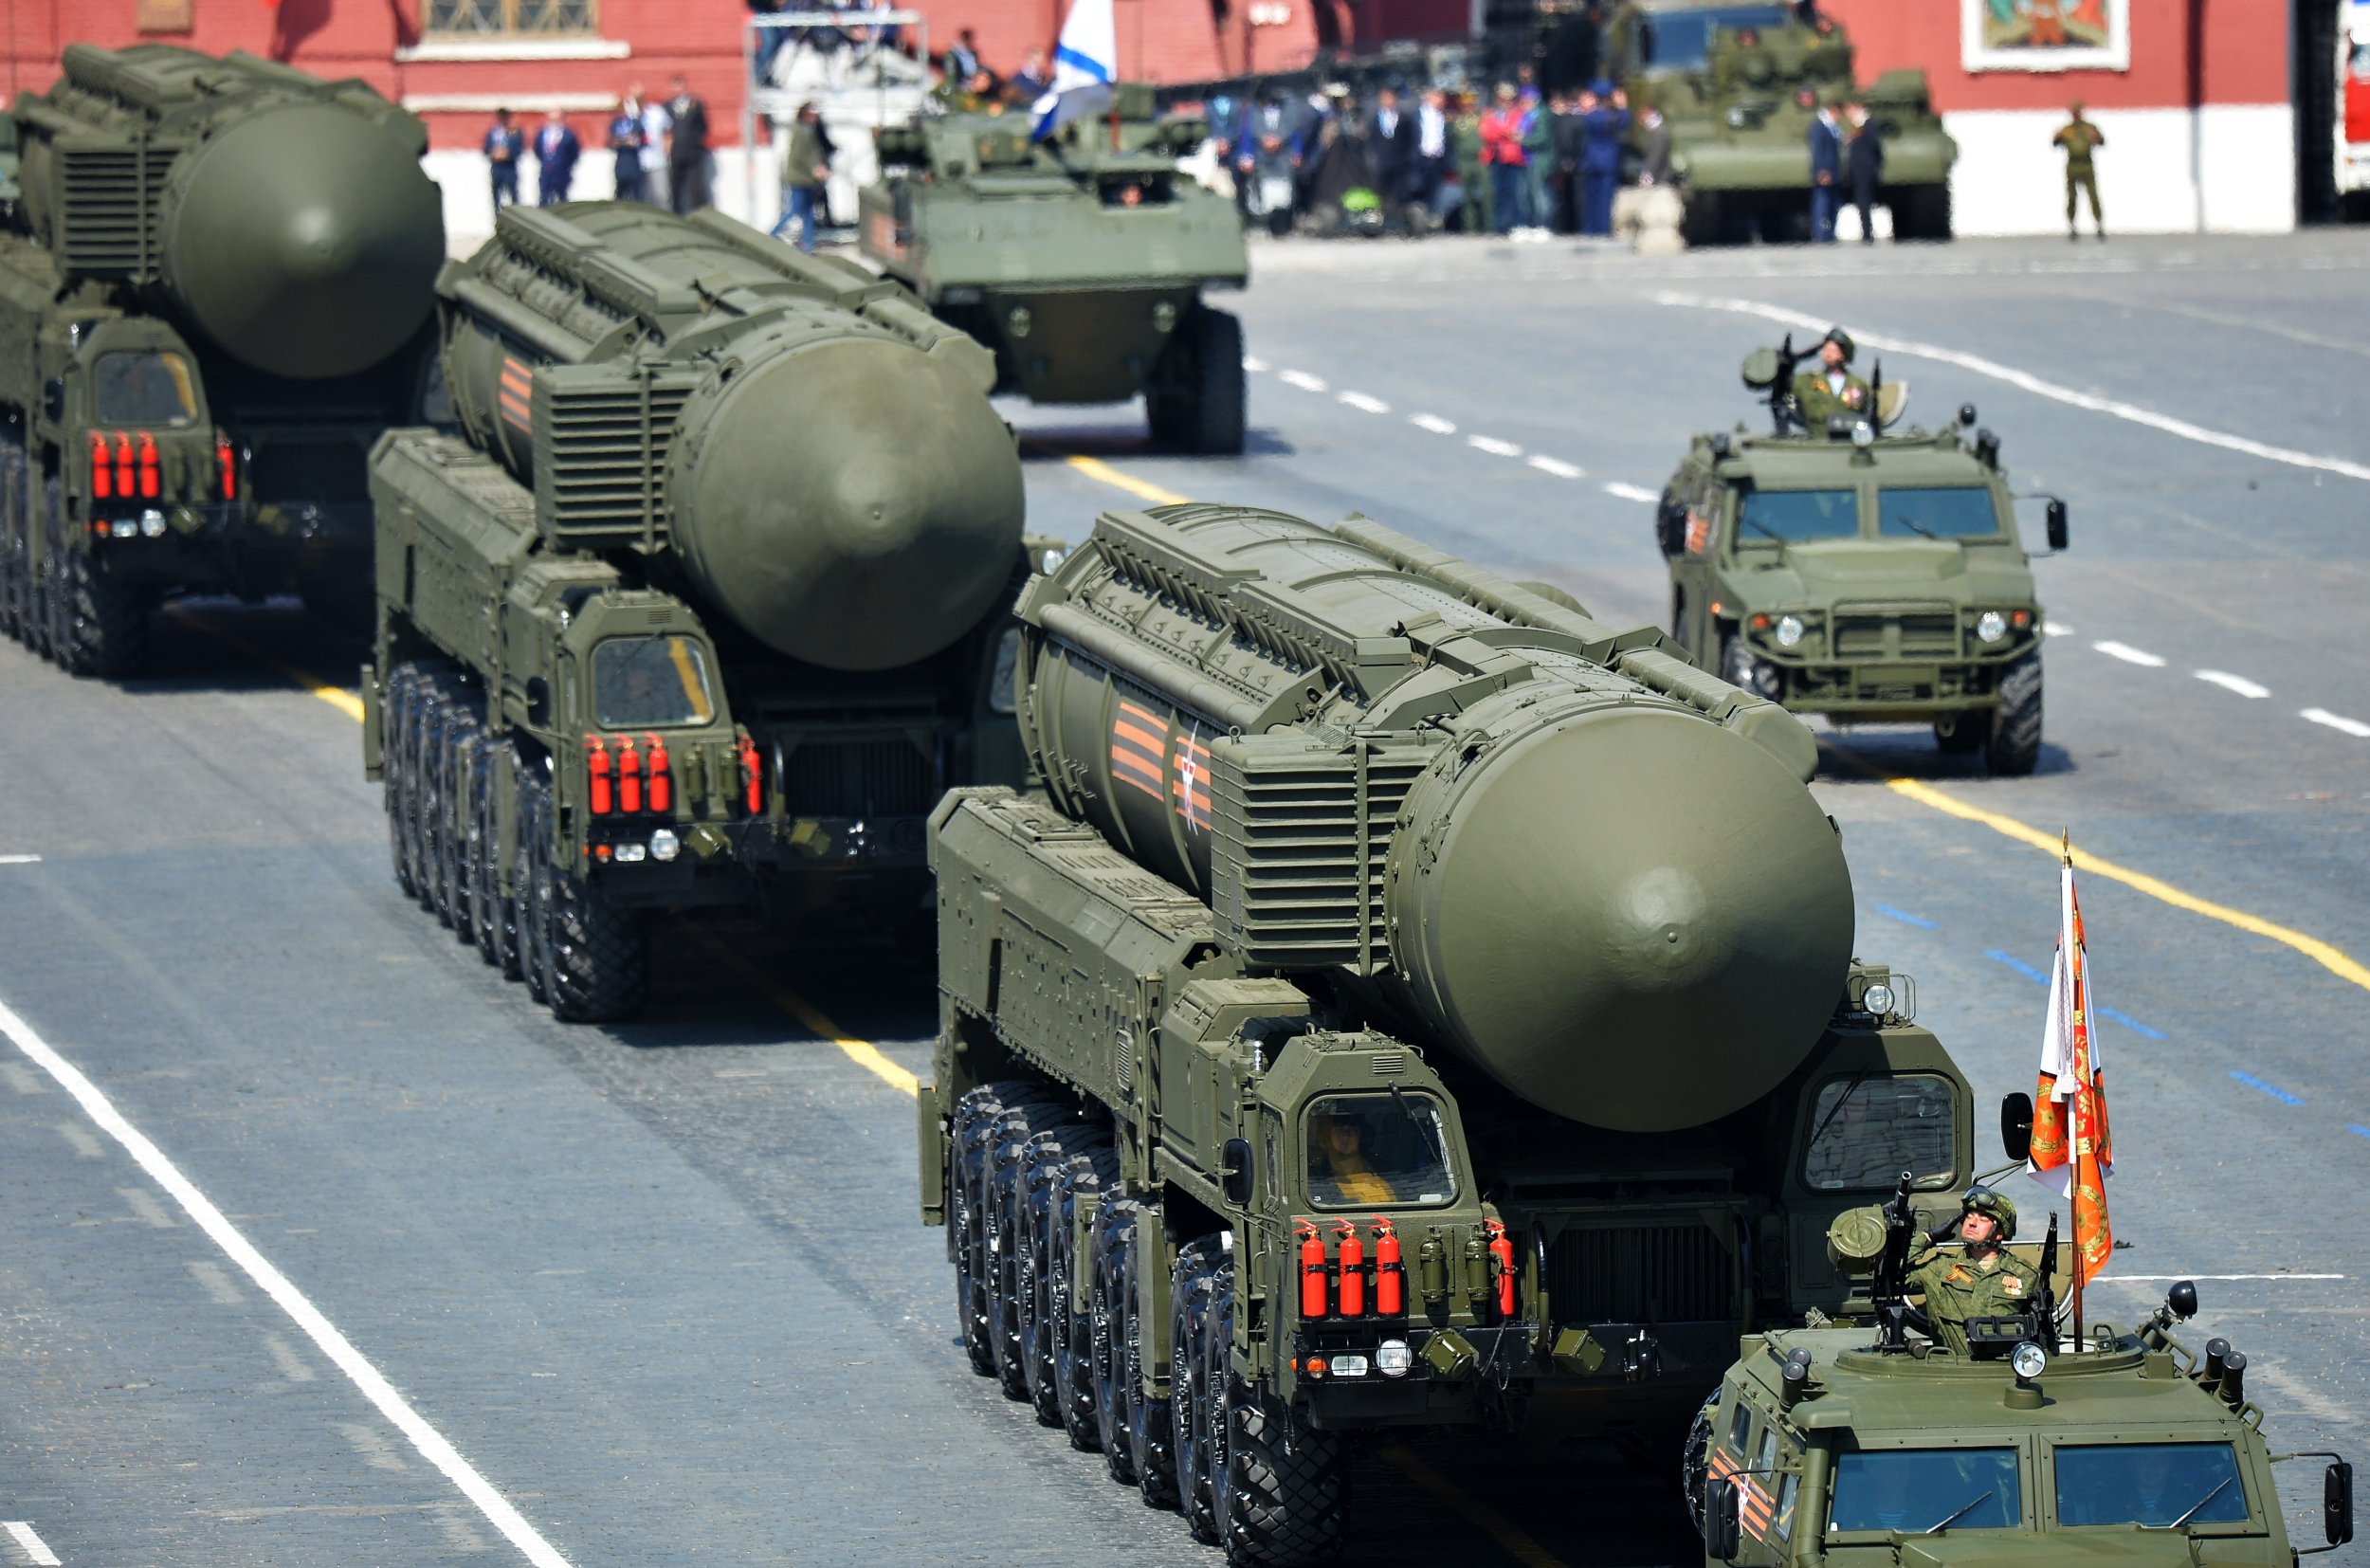 Das ist der Anfang vom Ende - Pagina 11 Yars-rs-24-icbm-victory-day-moscow